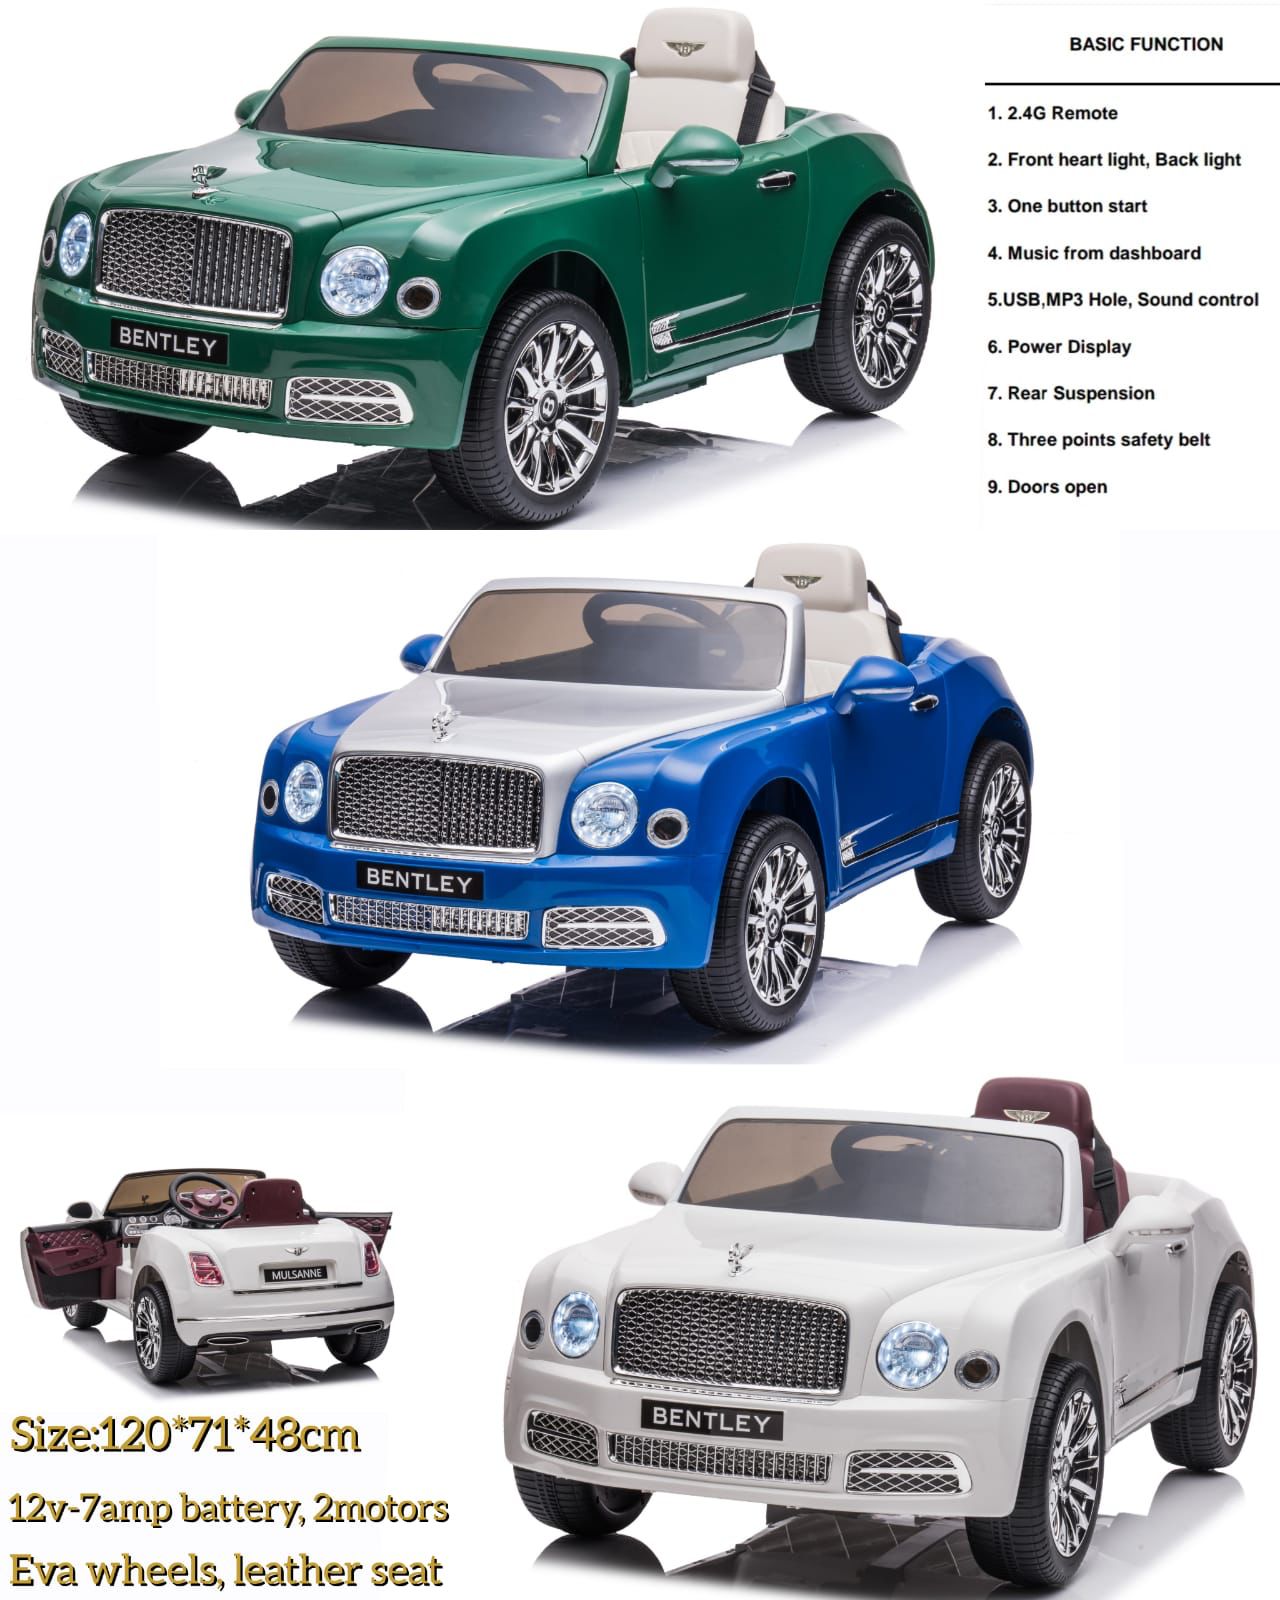 LOVELY BABY Bentley - Battery Operated Car - 12V 7AMP Battery - TWO Motor - Eva Wheels - Leather Seats